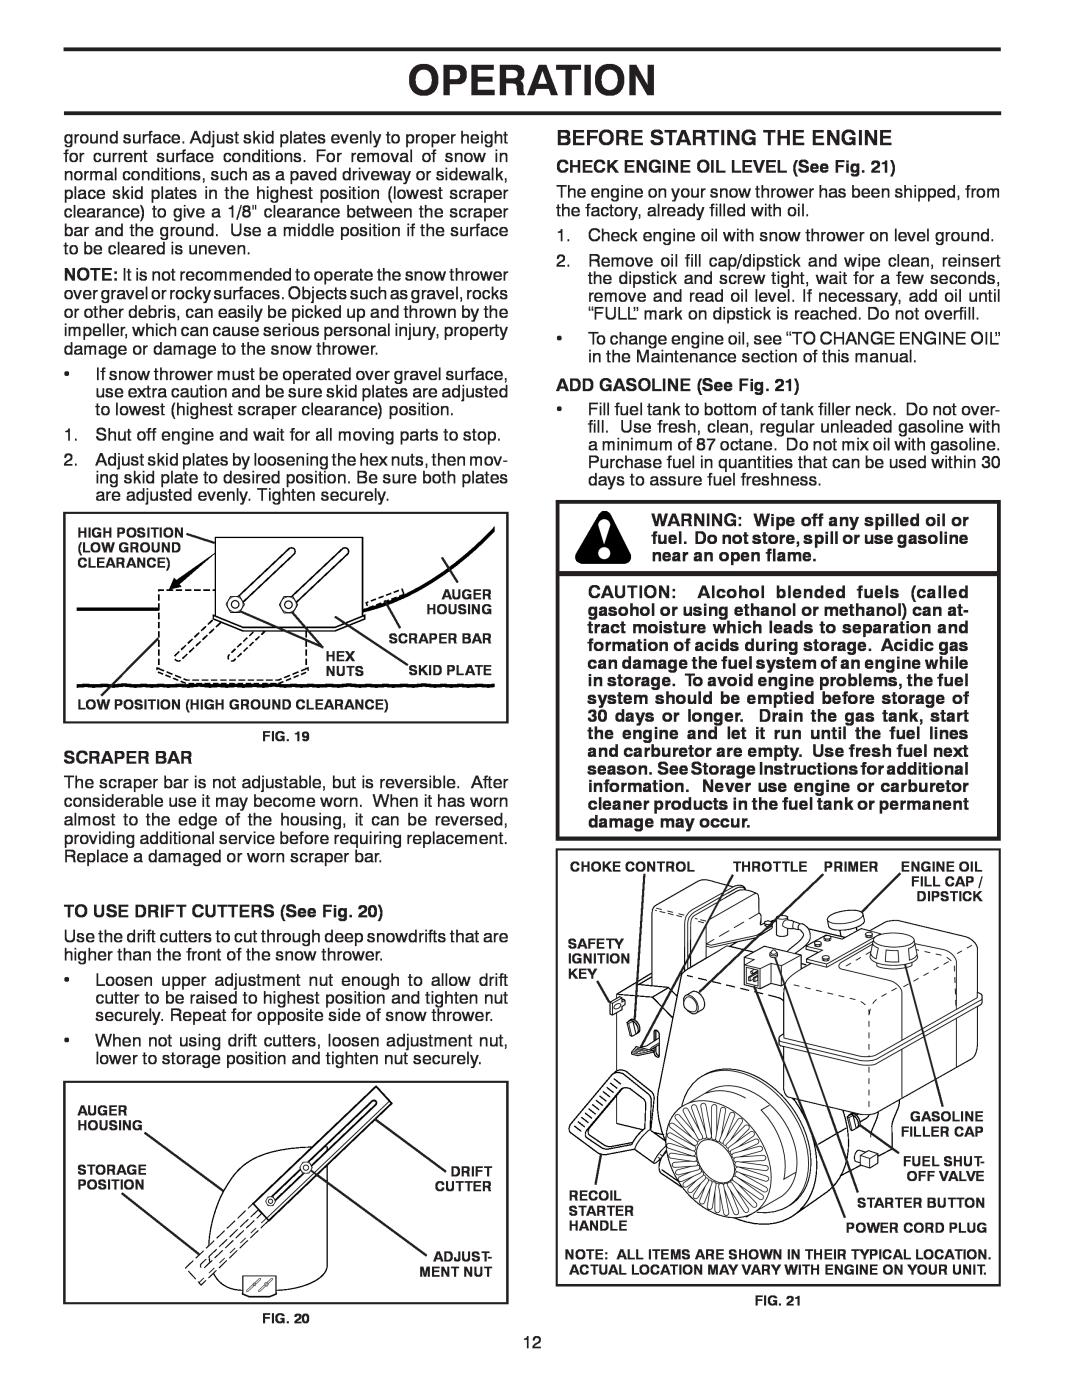 Poulan PP11530ES Before Starting The Engine, Operation, Scraper Bar, CHECK ENGINE OIL LEVEL See Fig, ADD GASOLINE See Fig 